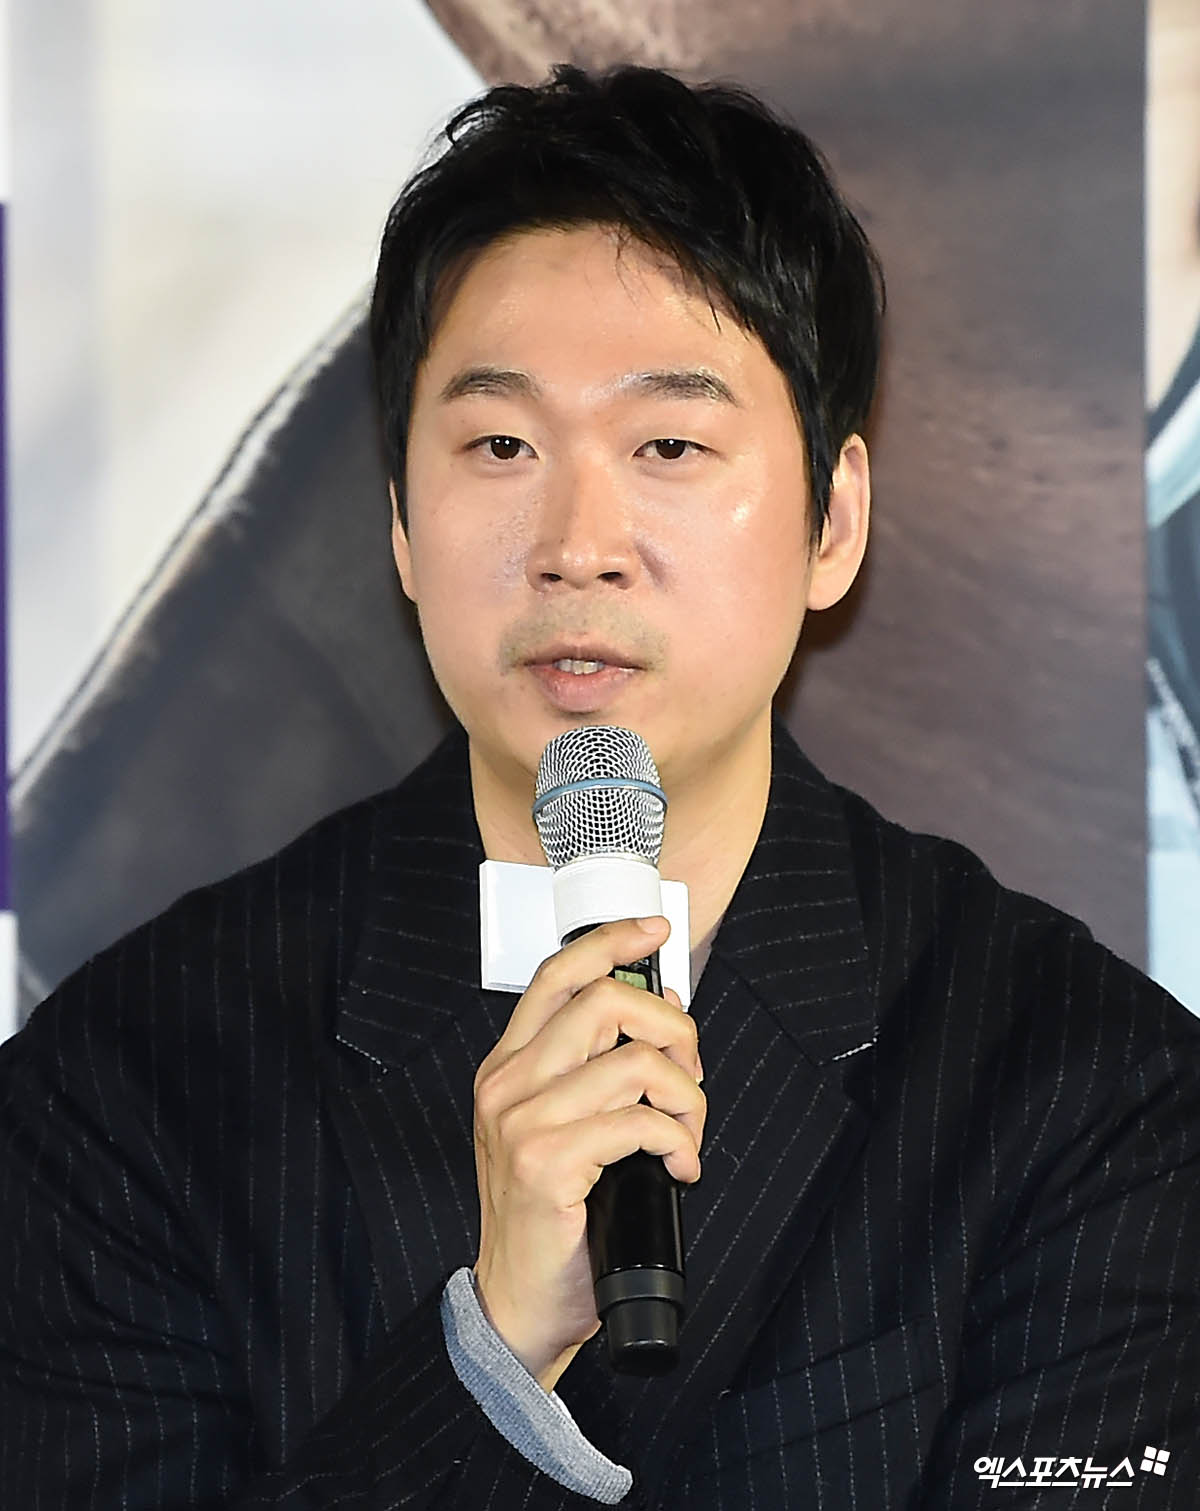 Director Kim Yong-hoon said that he was honored with Legend Actors such as Jeon Do-yeon, Jung Woo-sung and Youn Yuh-jung.On the 13th, a production report of the movie The Animals Who Want to Hold the Jeep (director Kim Yong-hoon) was held at Megabox Seongsu in Seongdong-gu, Seoul.Actors Jeon Do-yeon, Jung Woo-sung, Youn Yuh-jung, Shin Hyun Bin, Jungaram and Kim Yong-hoon attended the ceremony.Kim Yong-hoon said, I think it is a great honor and a dream to be able to work with Legend Actors to a new director.It was like playing the All-Star game from the first Kyonggi when I hit baseball. He said, Animals who want to catch straw. I was a lot burdened and I was under pressure to put a lot of pressure on their reputation, he said. But Actors filled me with my lack and empty parts.It was a series of surprises every moment we worked together. Meanwhile, The Animals Who Want to Hold the Spray is a crime drama of ordinary humans planning the worst of the worst to take the last chance of life, the money bag.